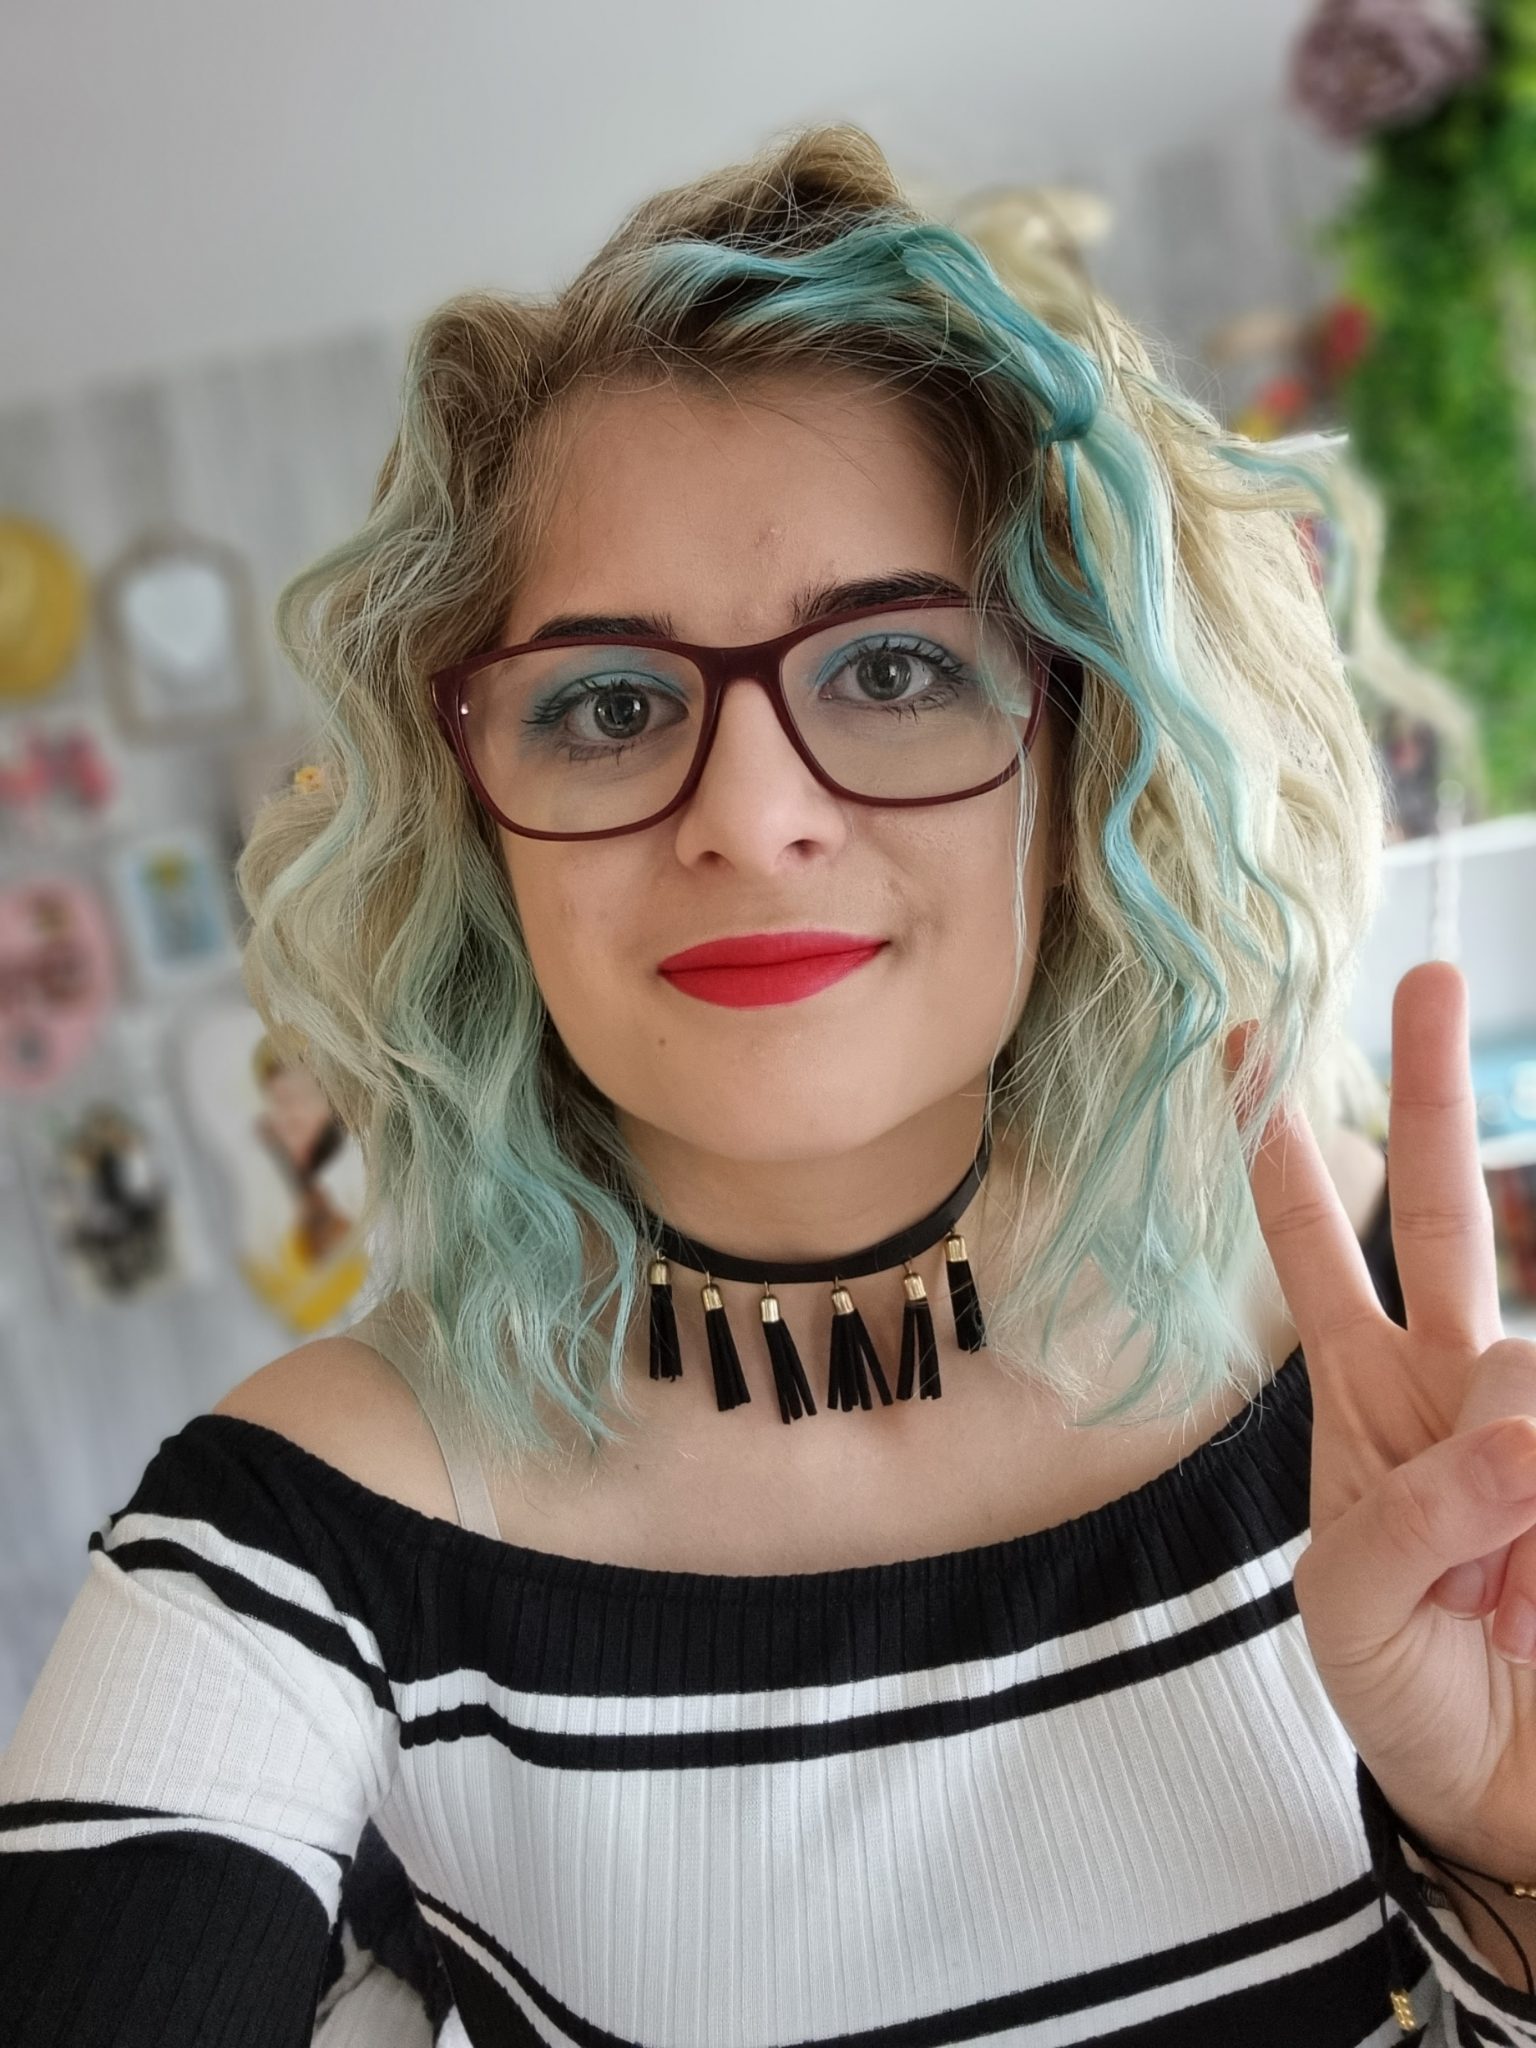 This is Weronika, she's wearing a black and white striped top with a black tassled necklace, she has glasses and shoulder length blond and blue curly hair. 